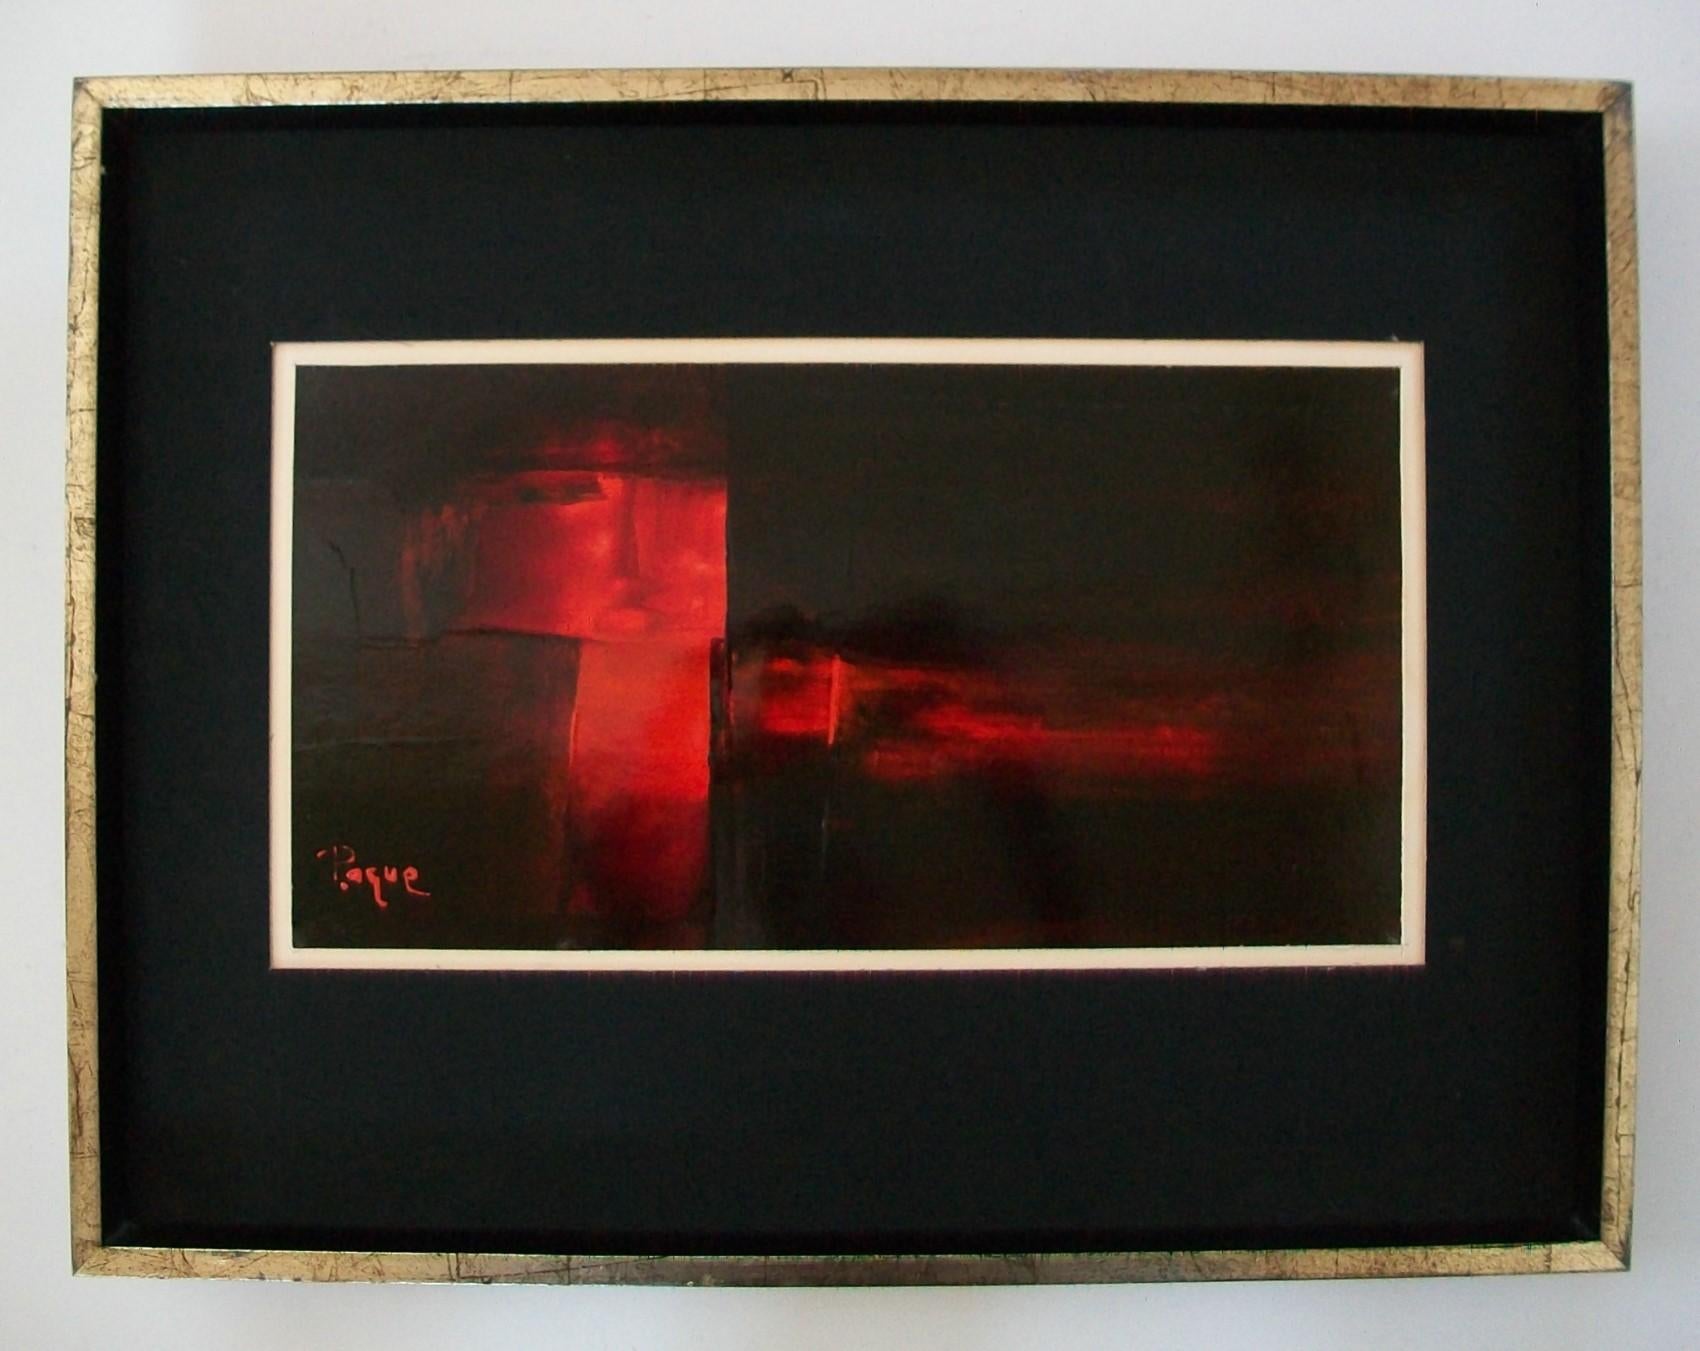 SERGE PAQUET (PAQUE) - midcentury abstract oil painting on card - featuring bold strokes of red against a black background - black and white matte boards under glass - silver leaf and black lacquer frame with beveled edge - signed Paque lower left -